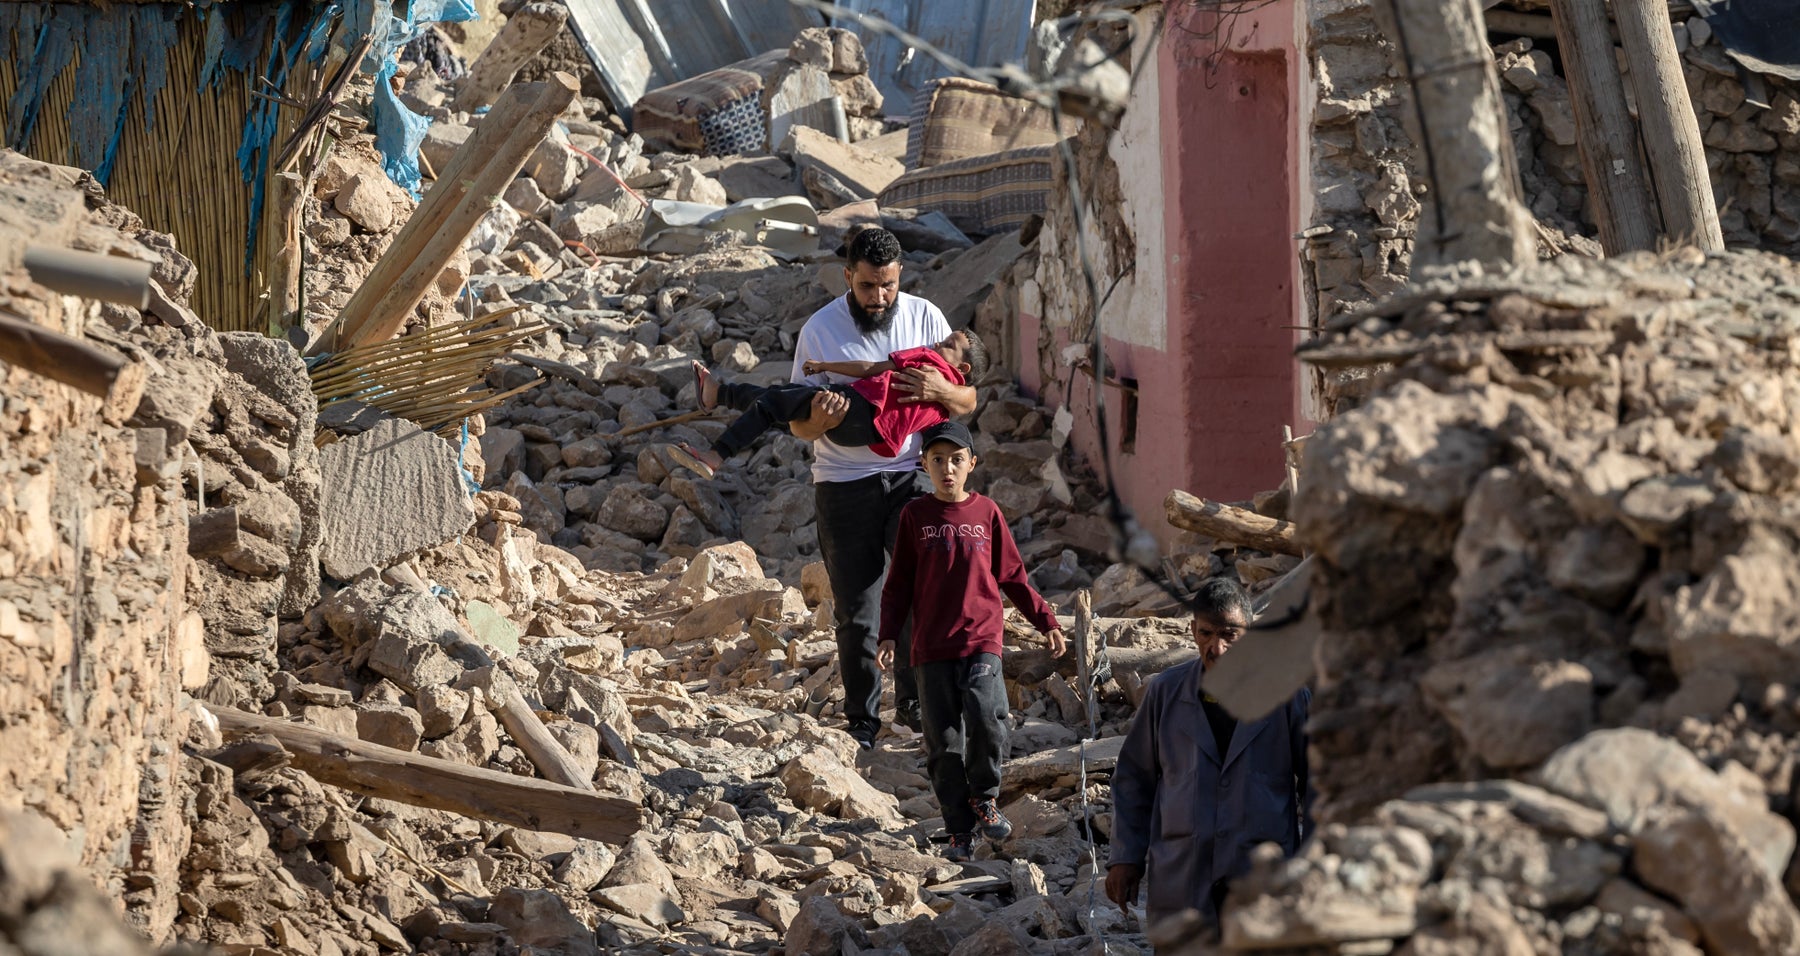 A man walks through the rubble carrying a child after an earthquake hit Morocco on 9 September 2023.